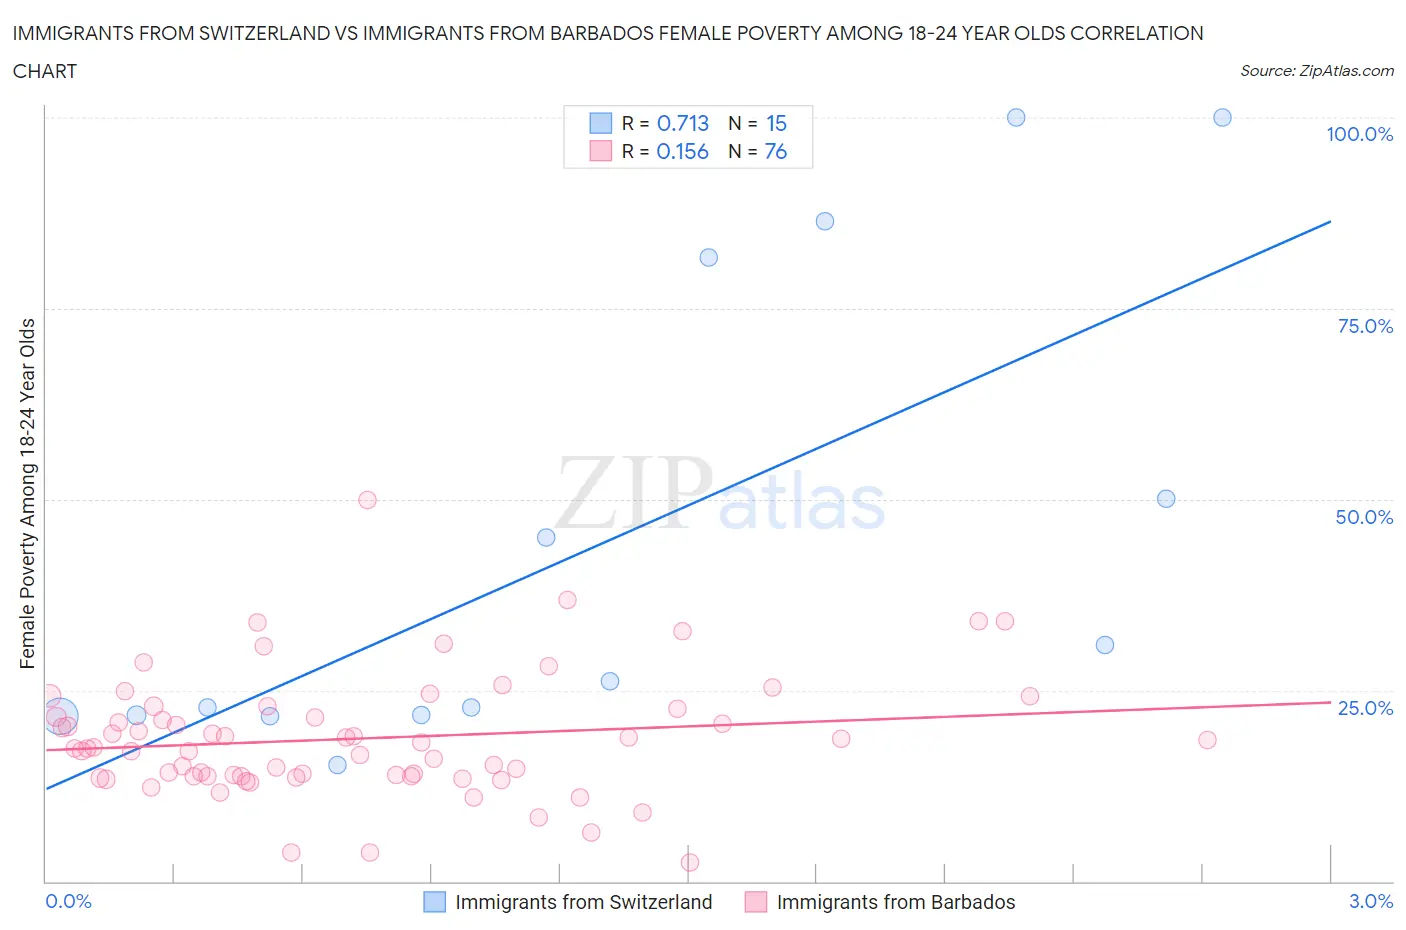 Immigrants from Switzerland vs Immigrants from Barbados Female Poverty Among 18-24 Year Olds